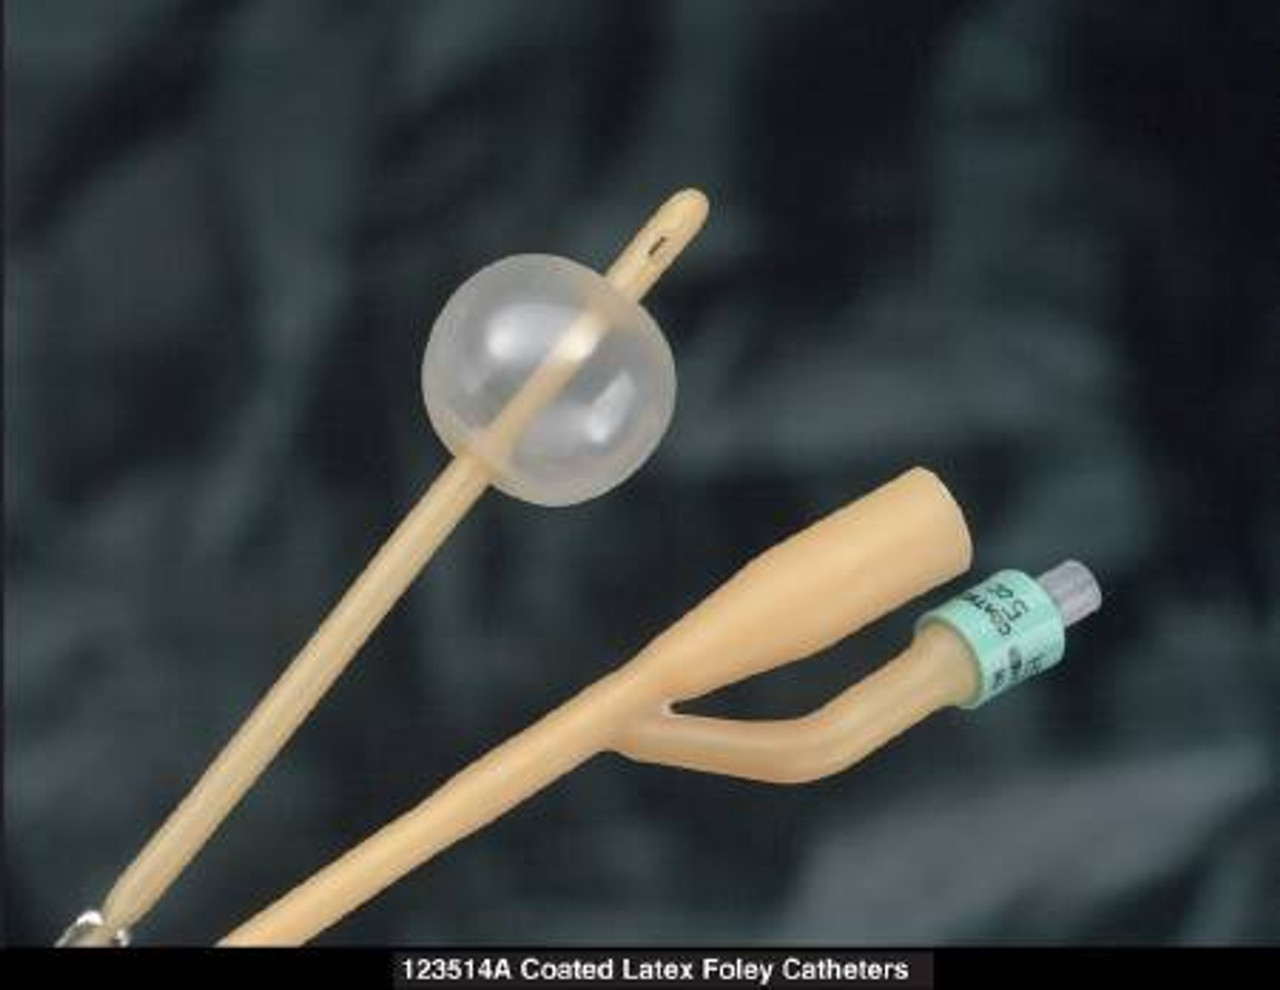 2-Way Foley Coude Tip Catheter silicone-Coated 5-10cc 14fr each (TY3558) (TY3558)